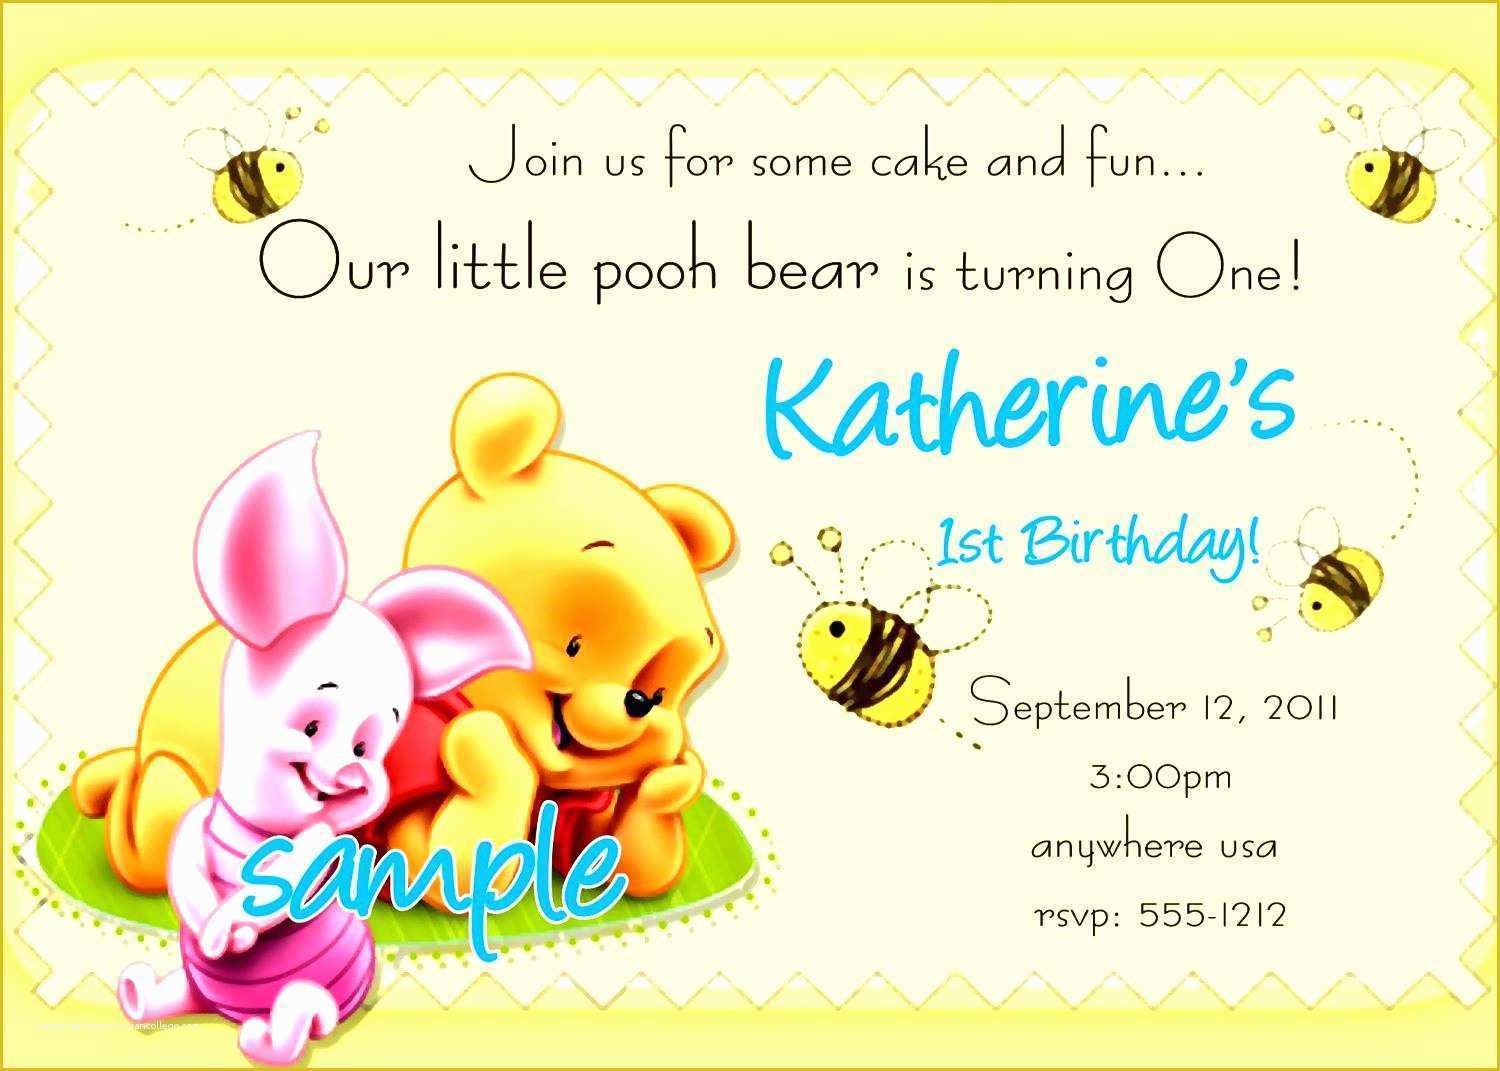 Birthday Party Invitations for Kids Free Templates Of 21 Kids Birthday Invitation Wording that We Can Make